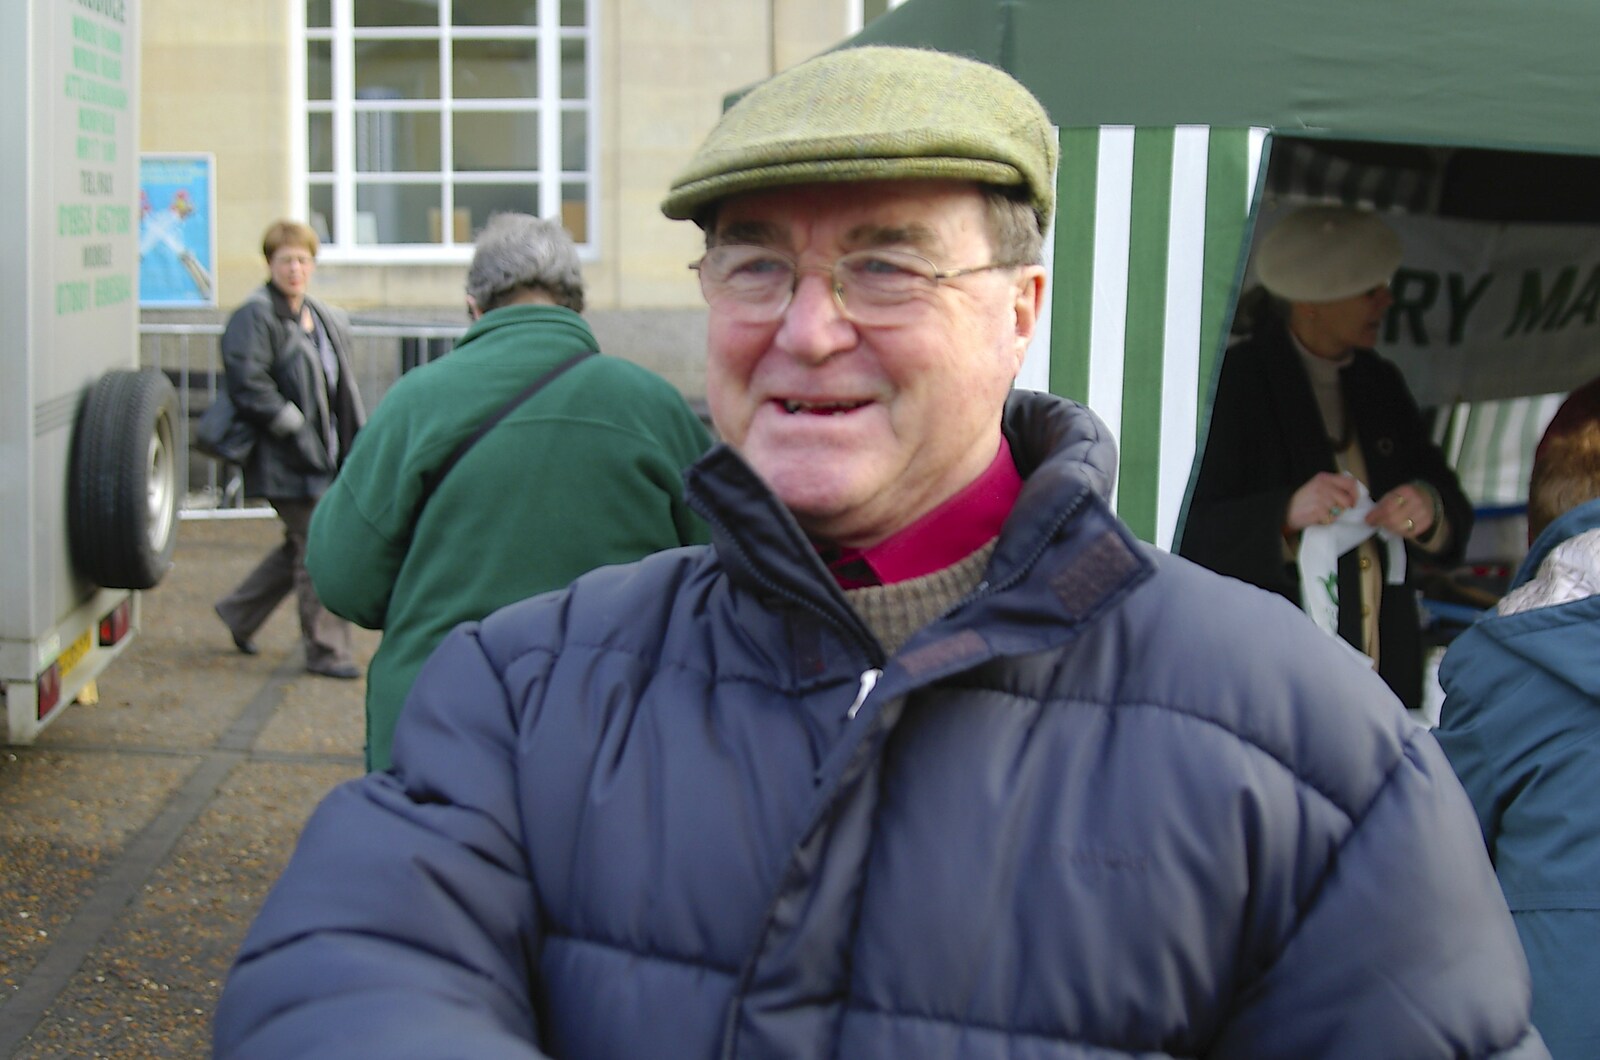 Peter Allen wanders about the Market Place in Diss from Pheasants, Sunsets and The BBs at Bressingham, Norfolk - 11th December 2005